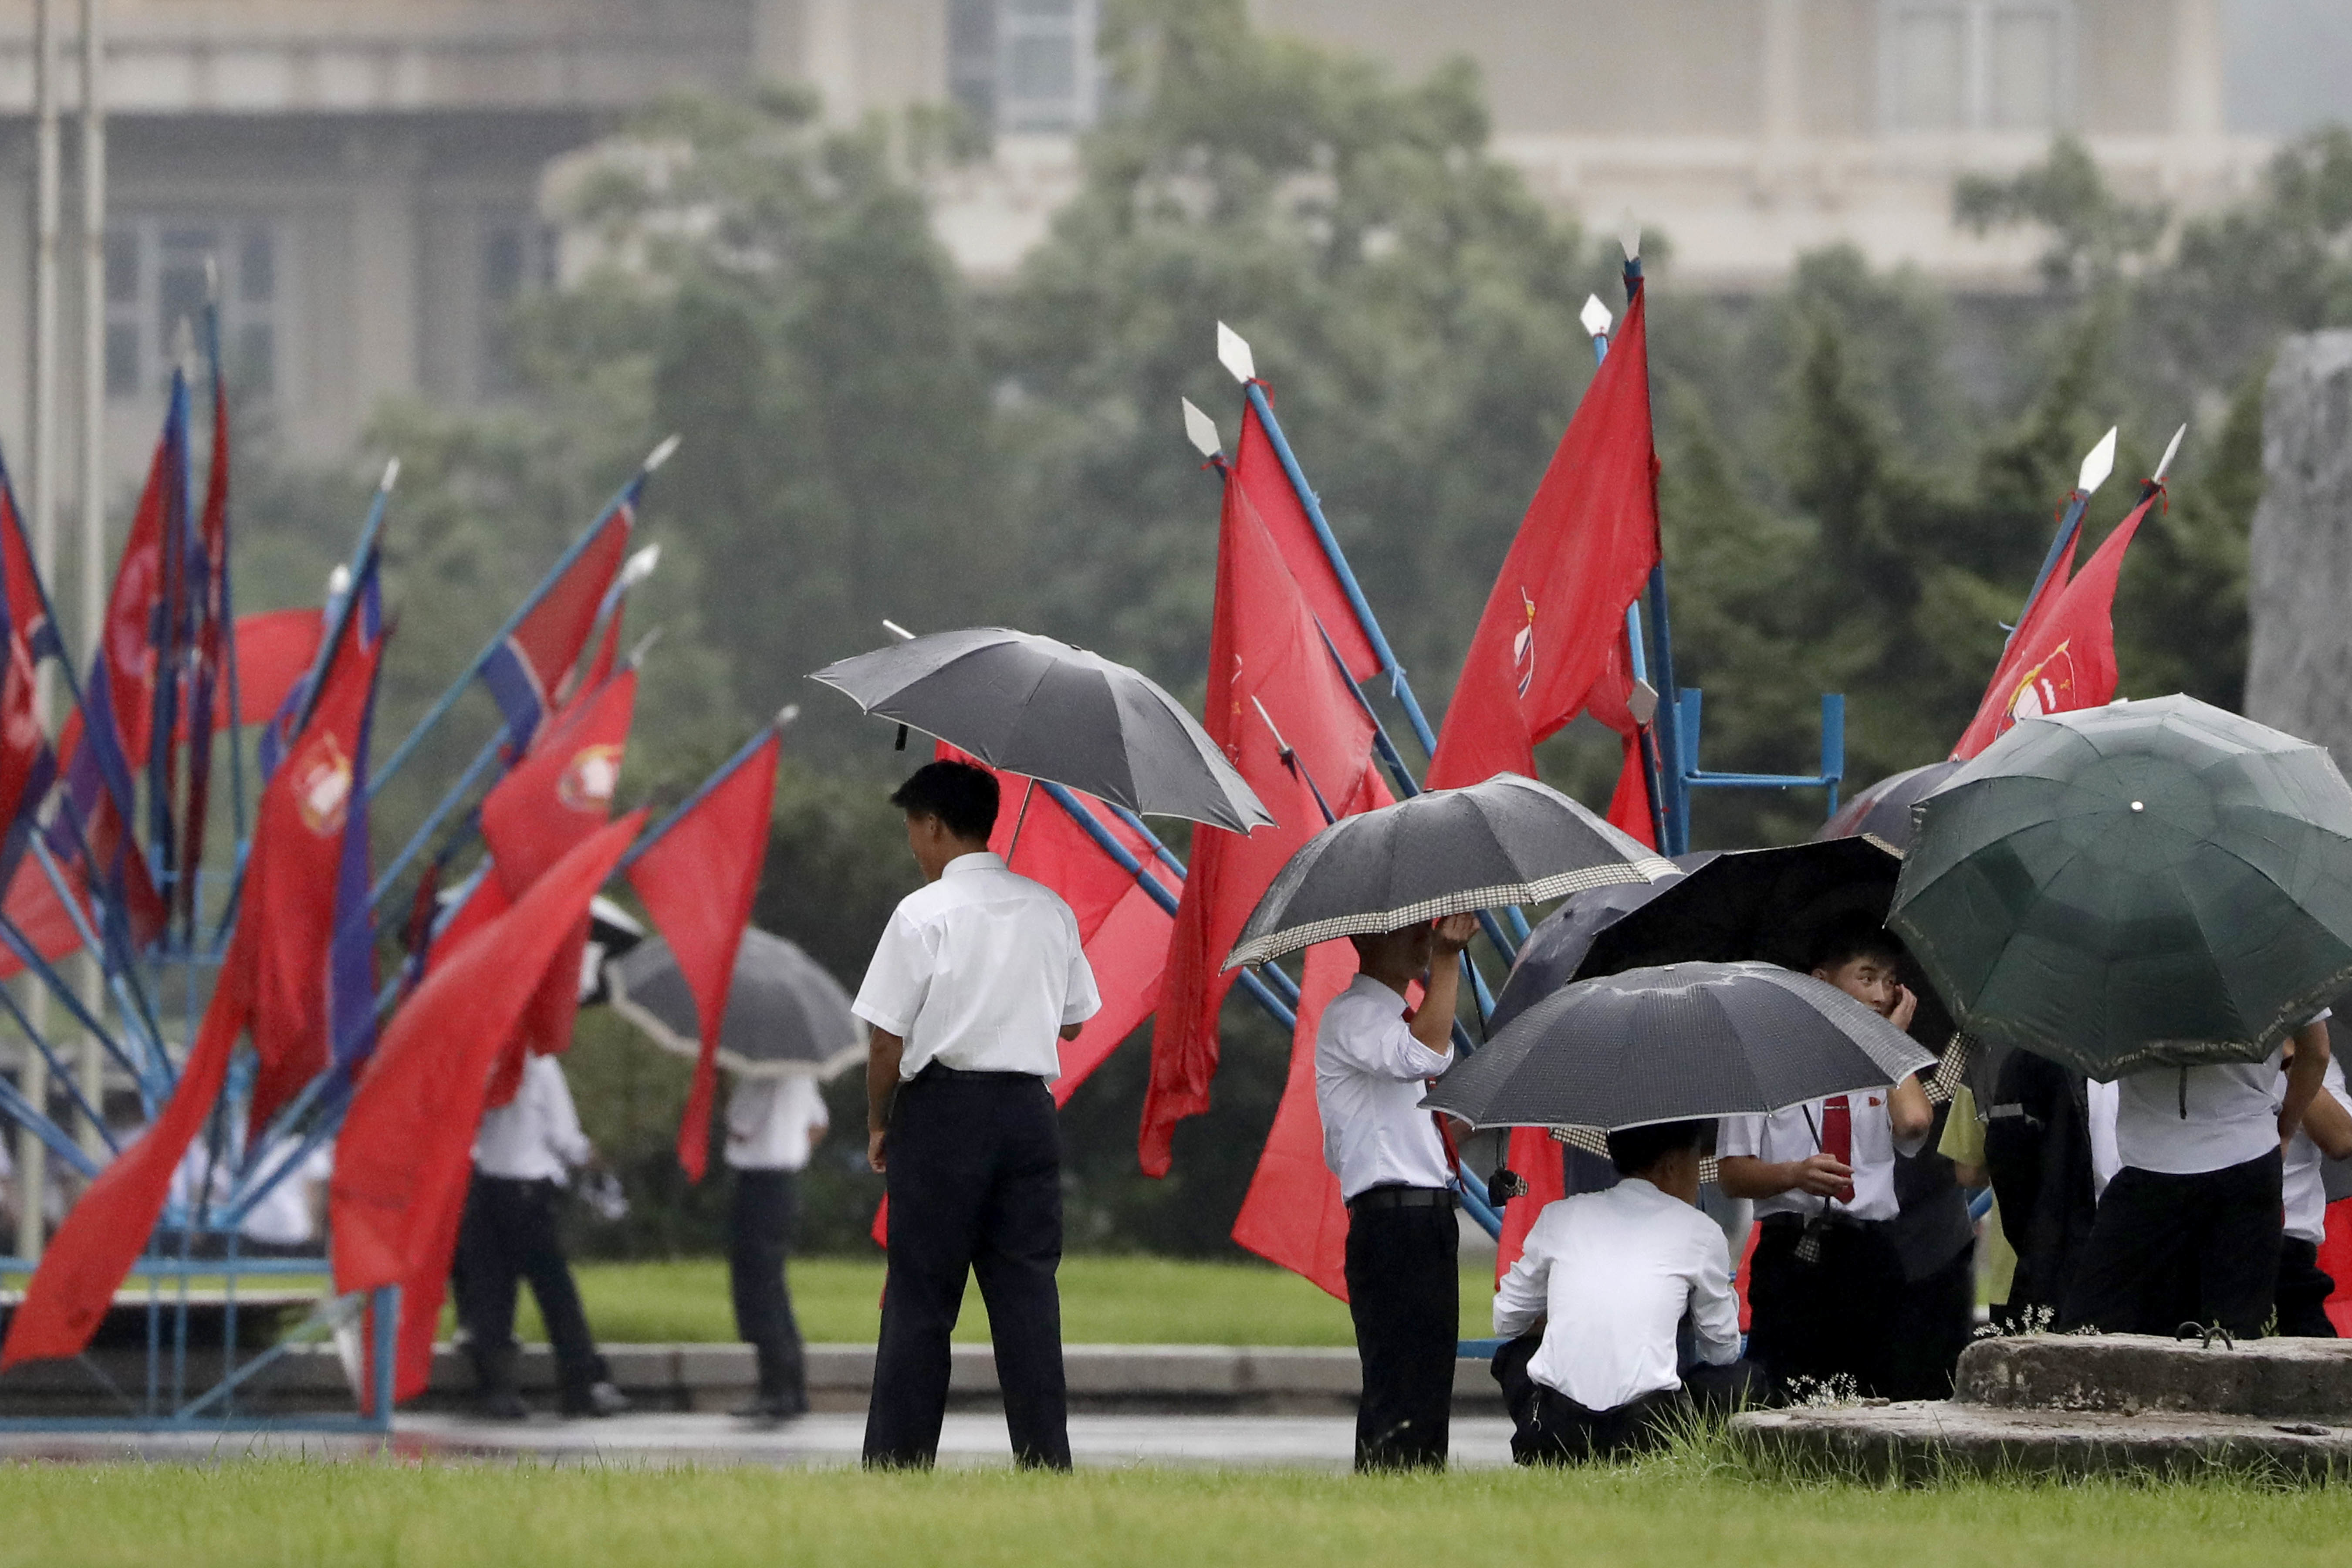 University students wait in the rain for the start of a mass dance event on Thursday, July 27, 2017, in Pyongyang, North Korea as part of celebrations for the 64th anniversary of the armistice that ended the Korean War. (AP Photo/Wong Maye-E)